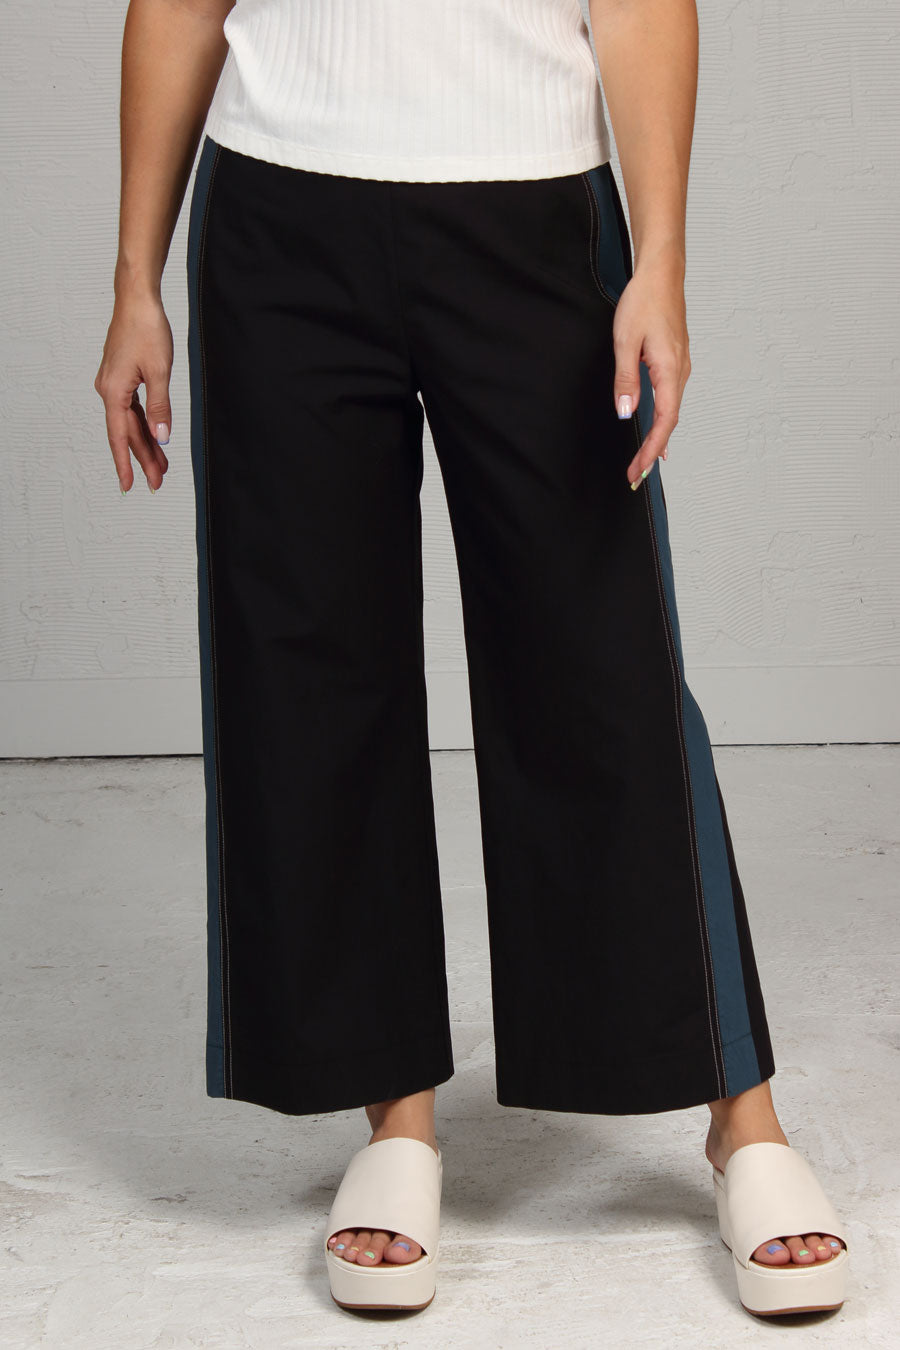 Solid Cotton Match Pant - Black/Teal